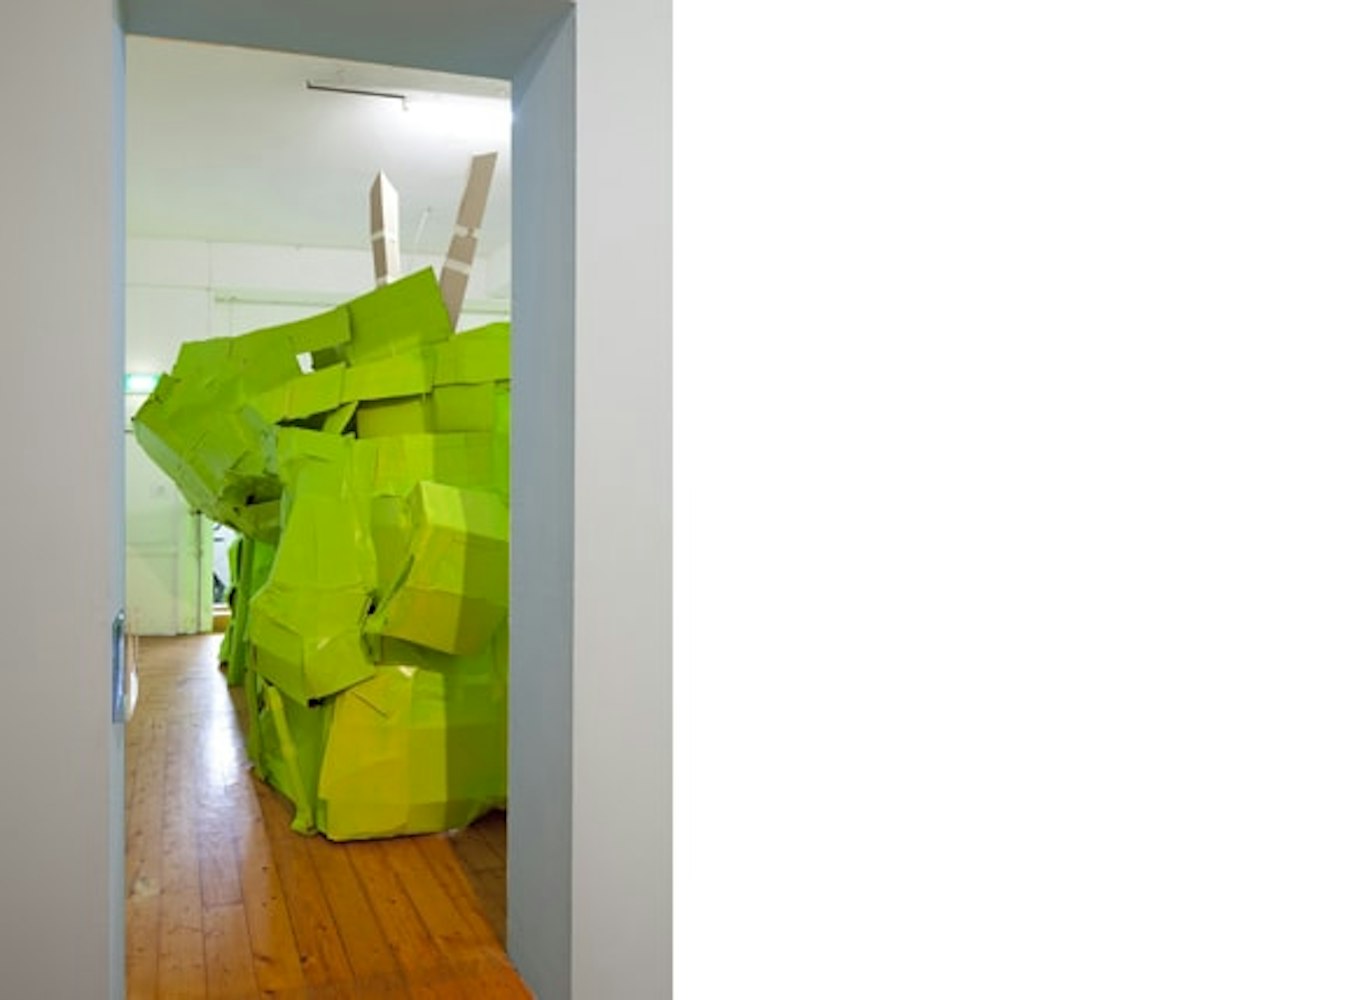 Catching Trucks, 2011, installation at Gertrude Contemporary. Image courtesy of the Gertrude Contemporary archives.